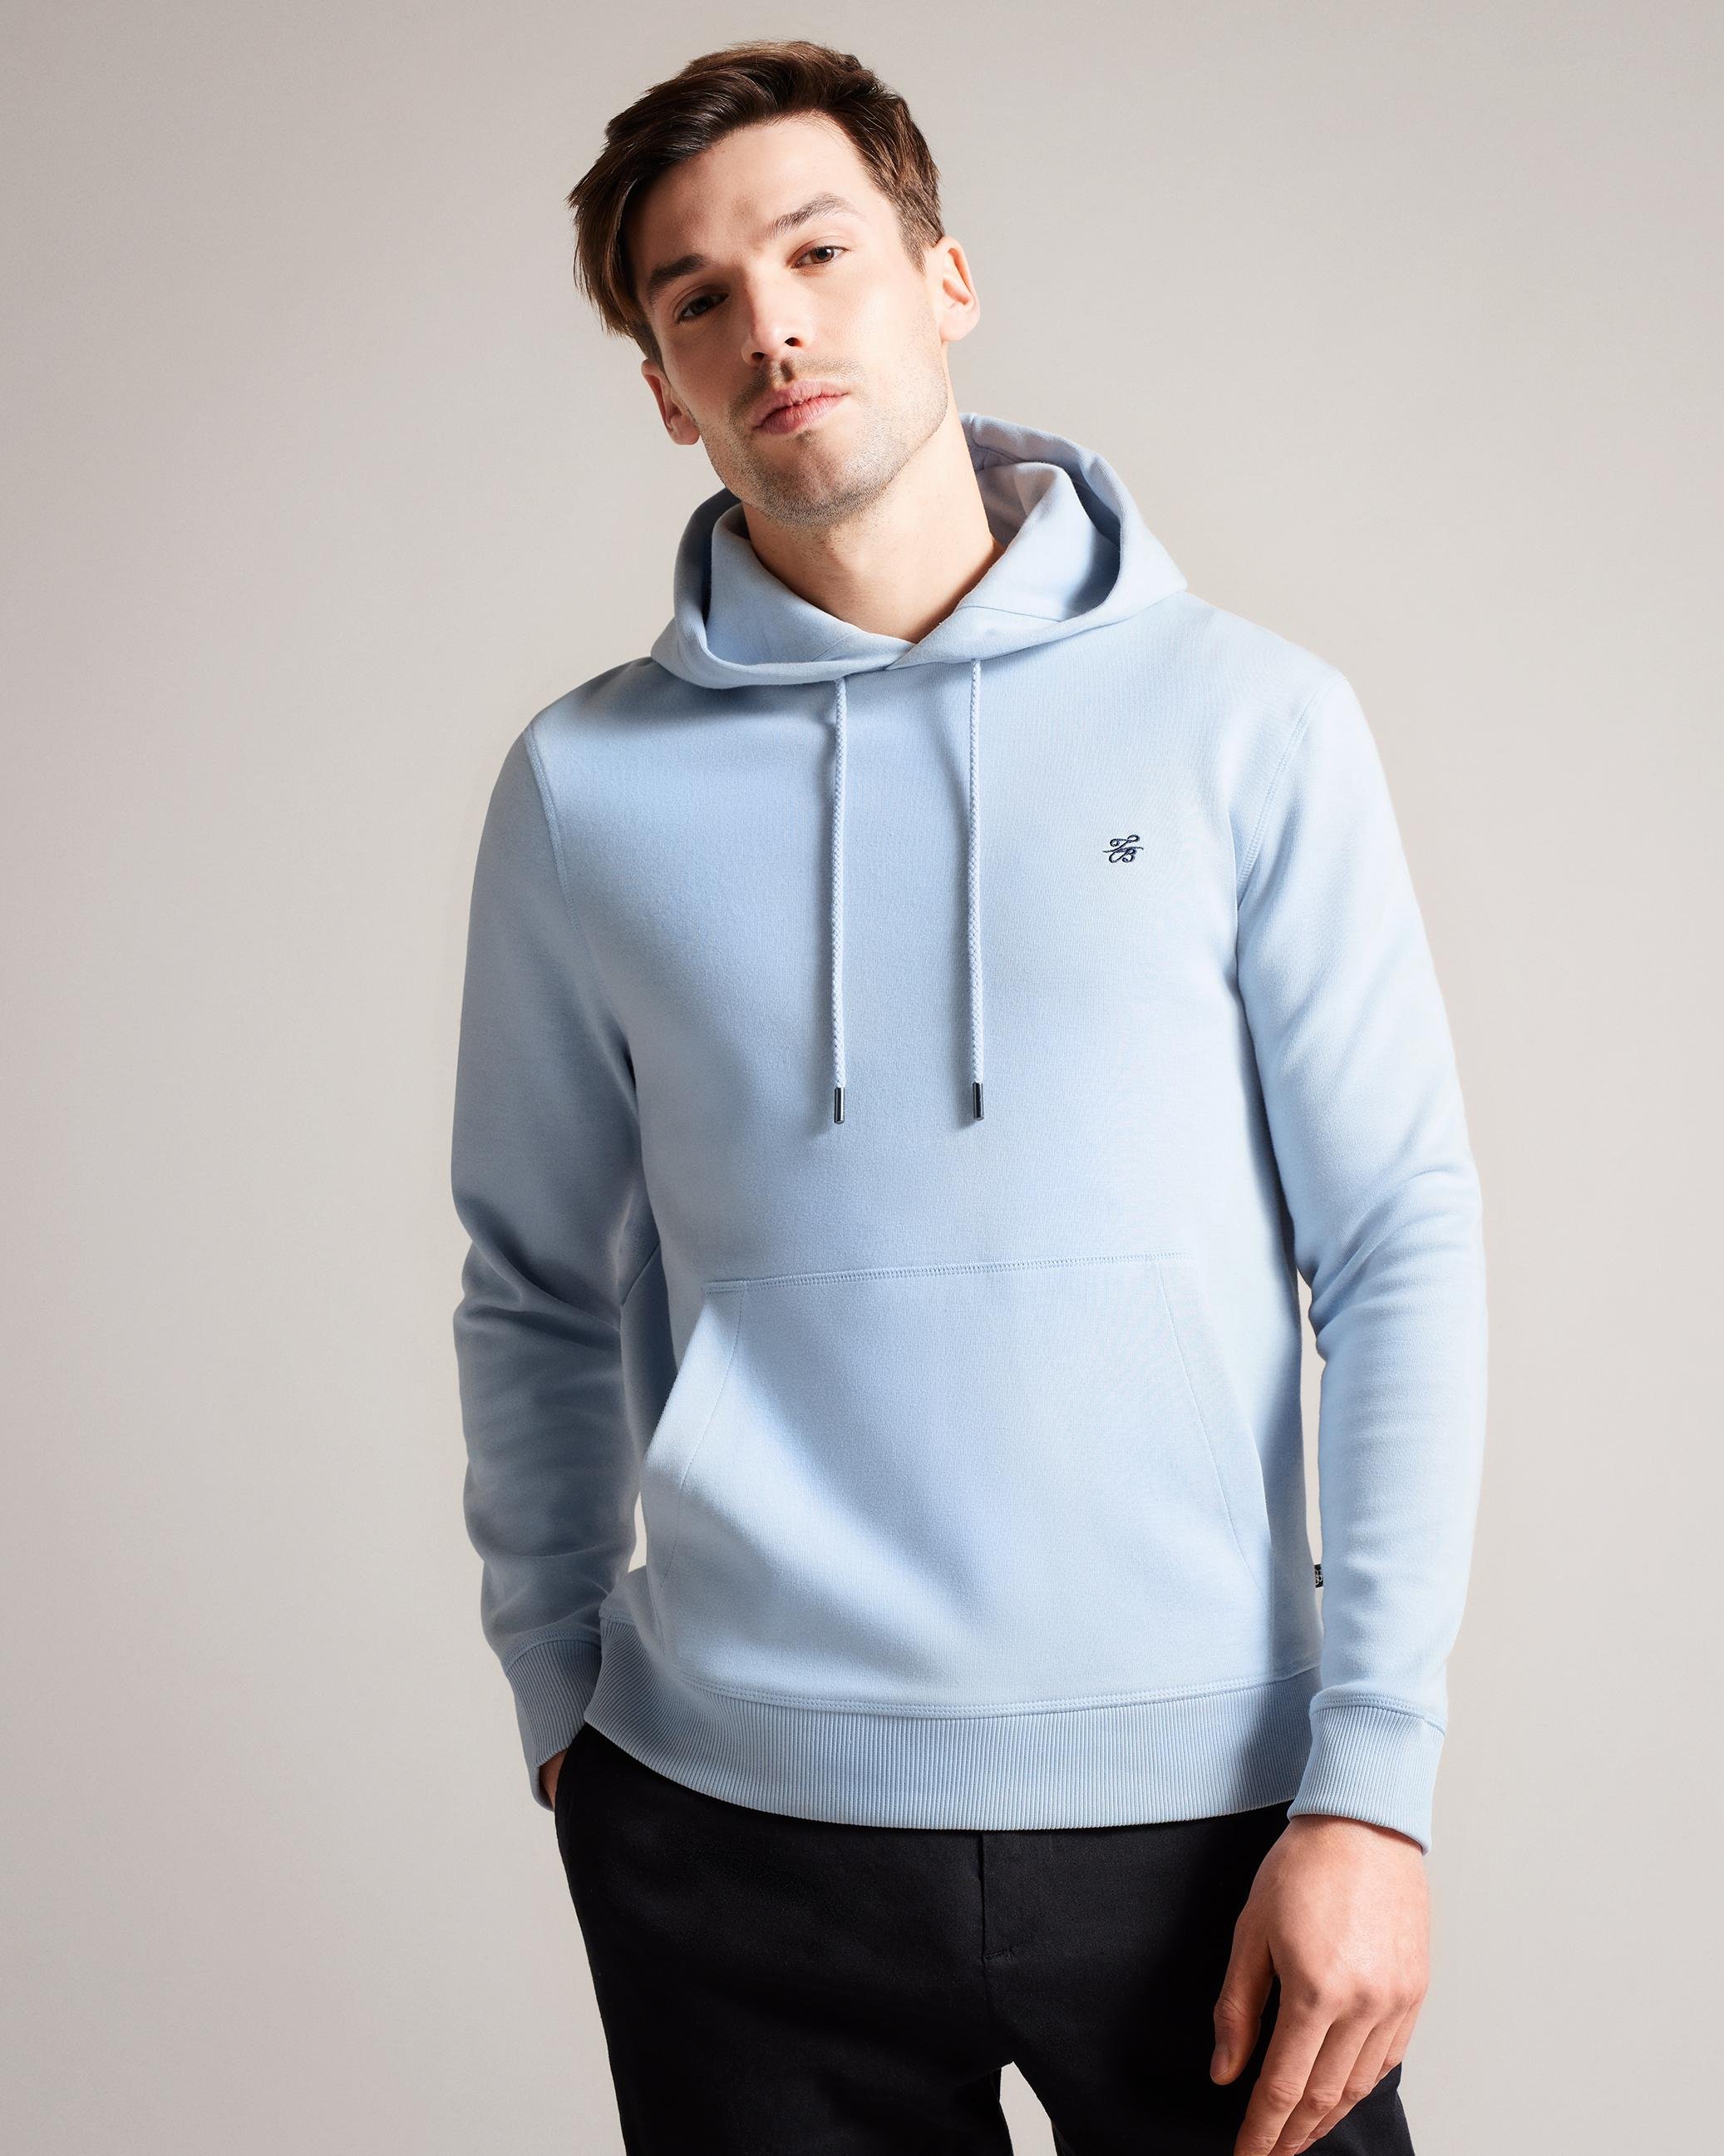 Regular Fit Monogram Hoodie - MAYALL - Pale Blue by TED BAKER | jellibeans